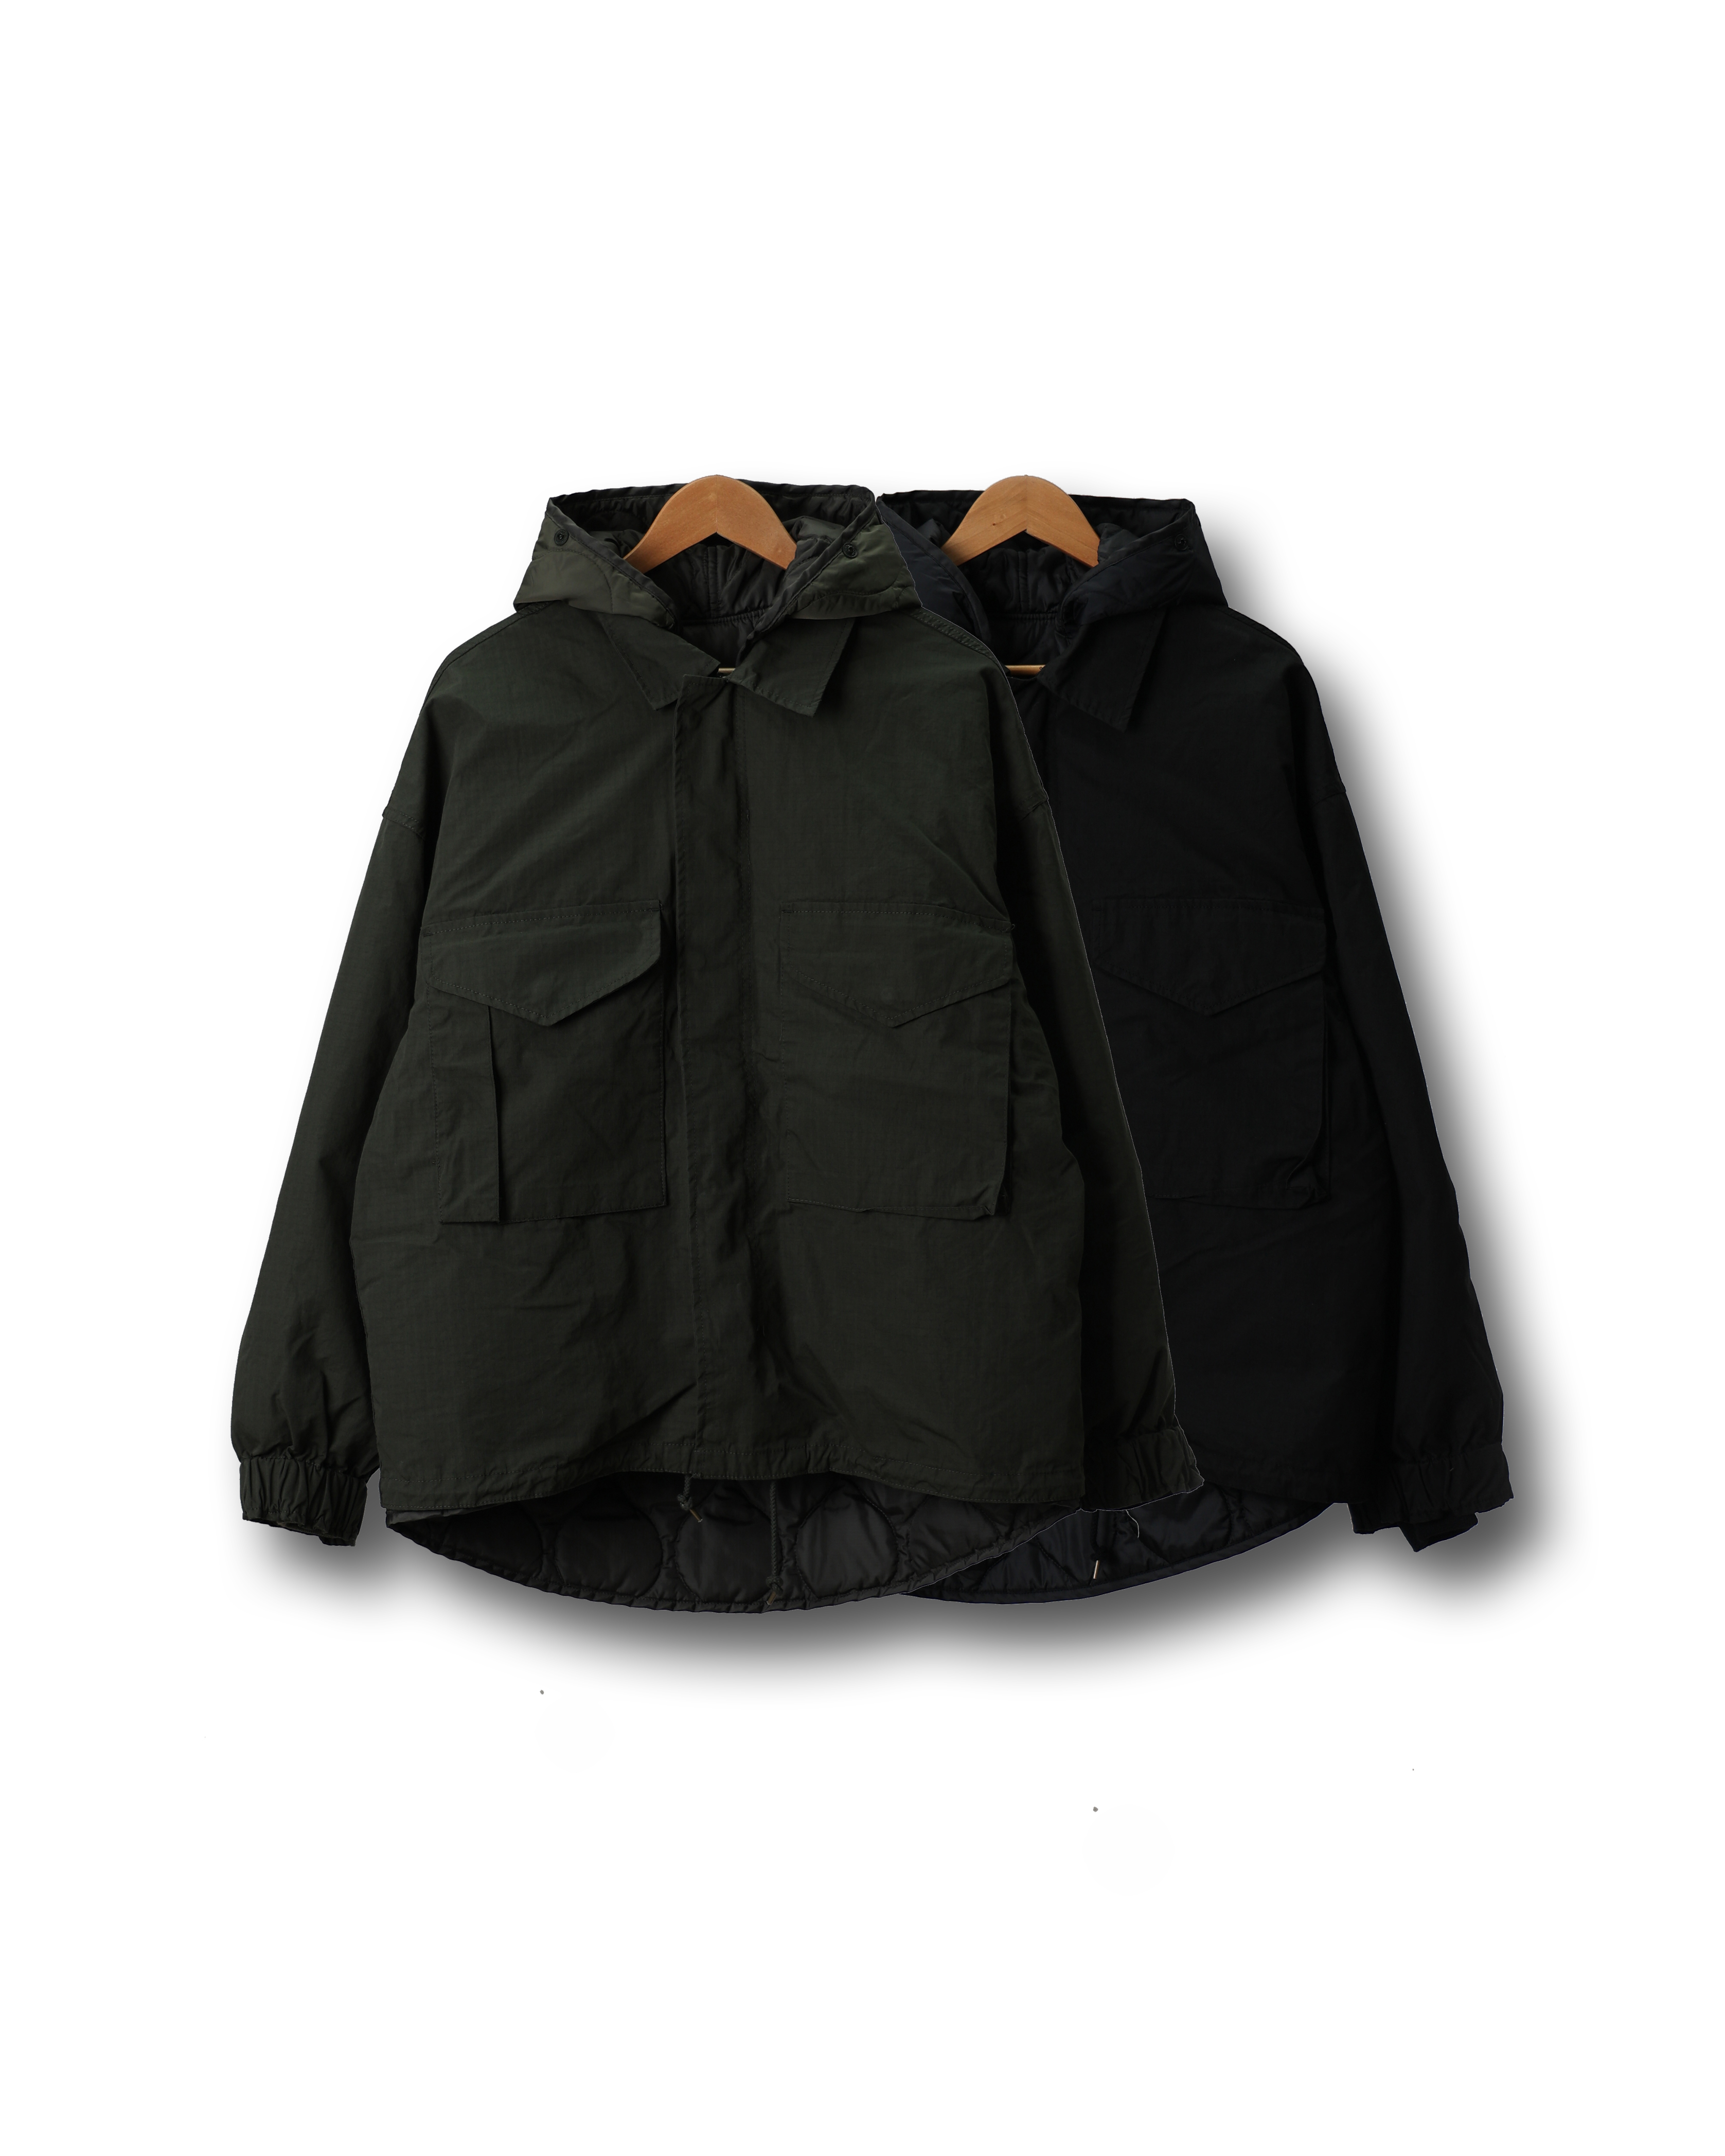 SPCET Quilt Layered Hoodied Mil Parka (Black/Olive)